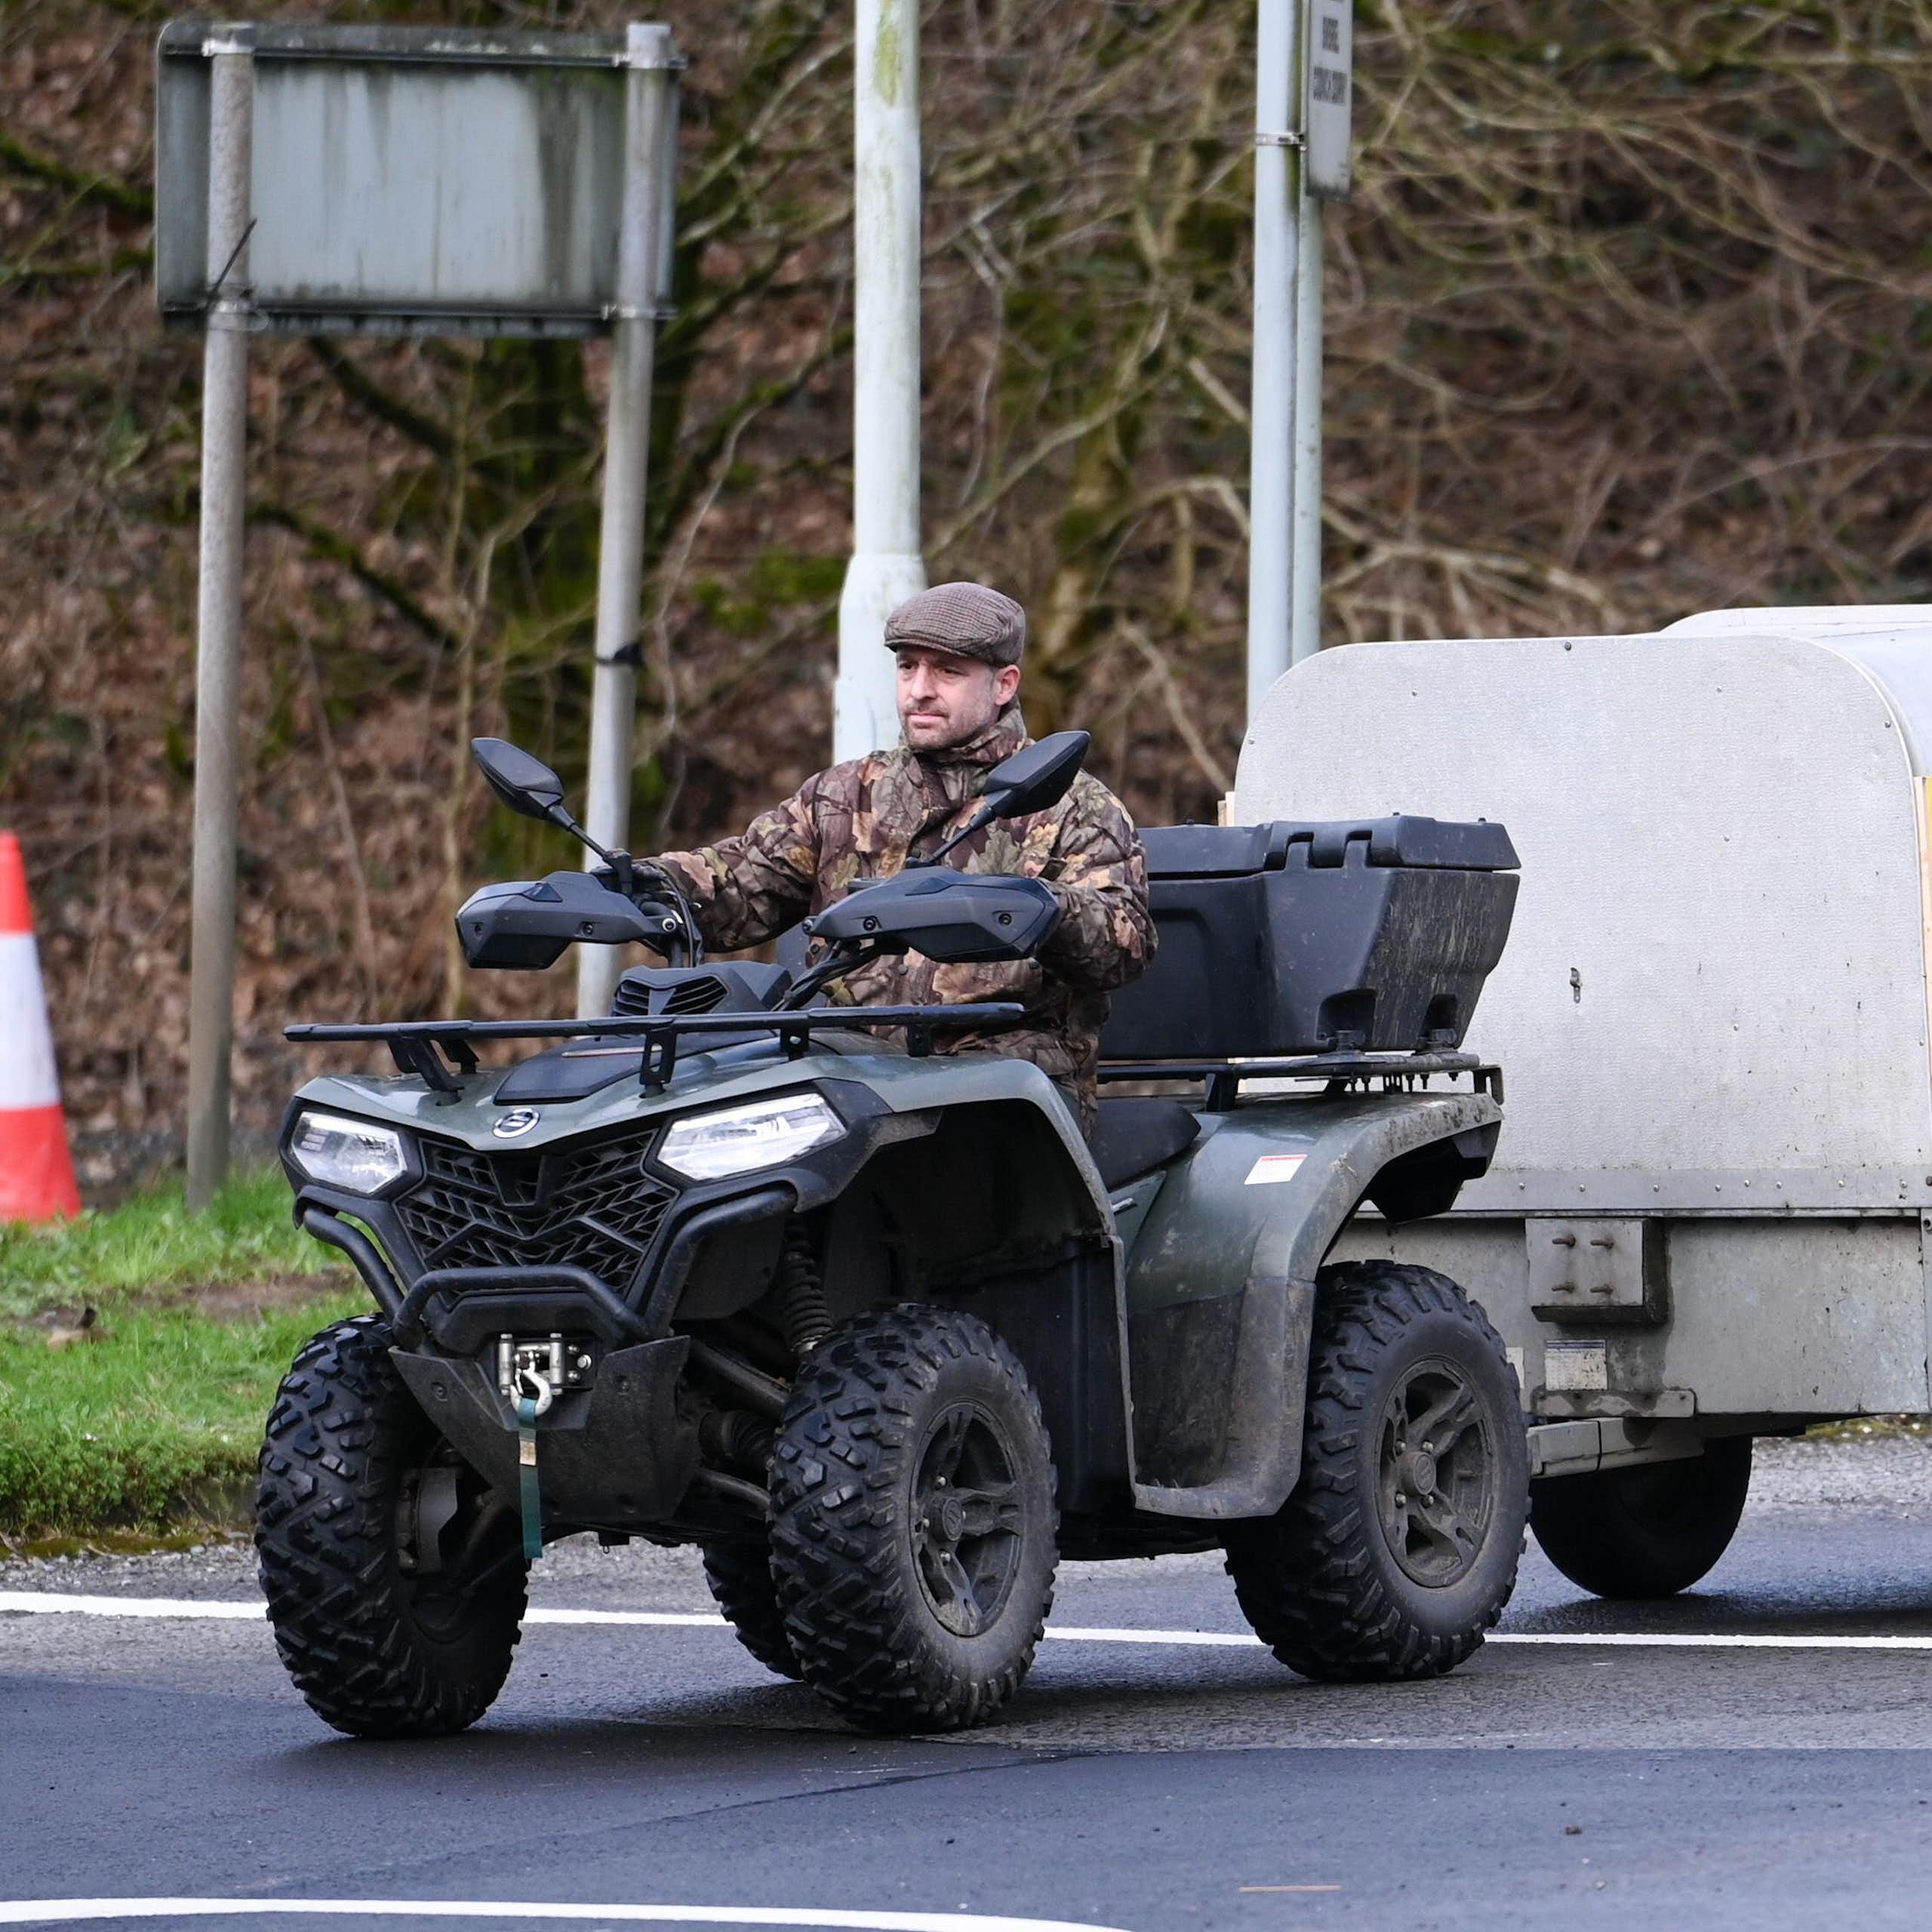 A man driving a quad bike, pulling a trailer with a sign on it that reads 'no farmers, no food'.